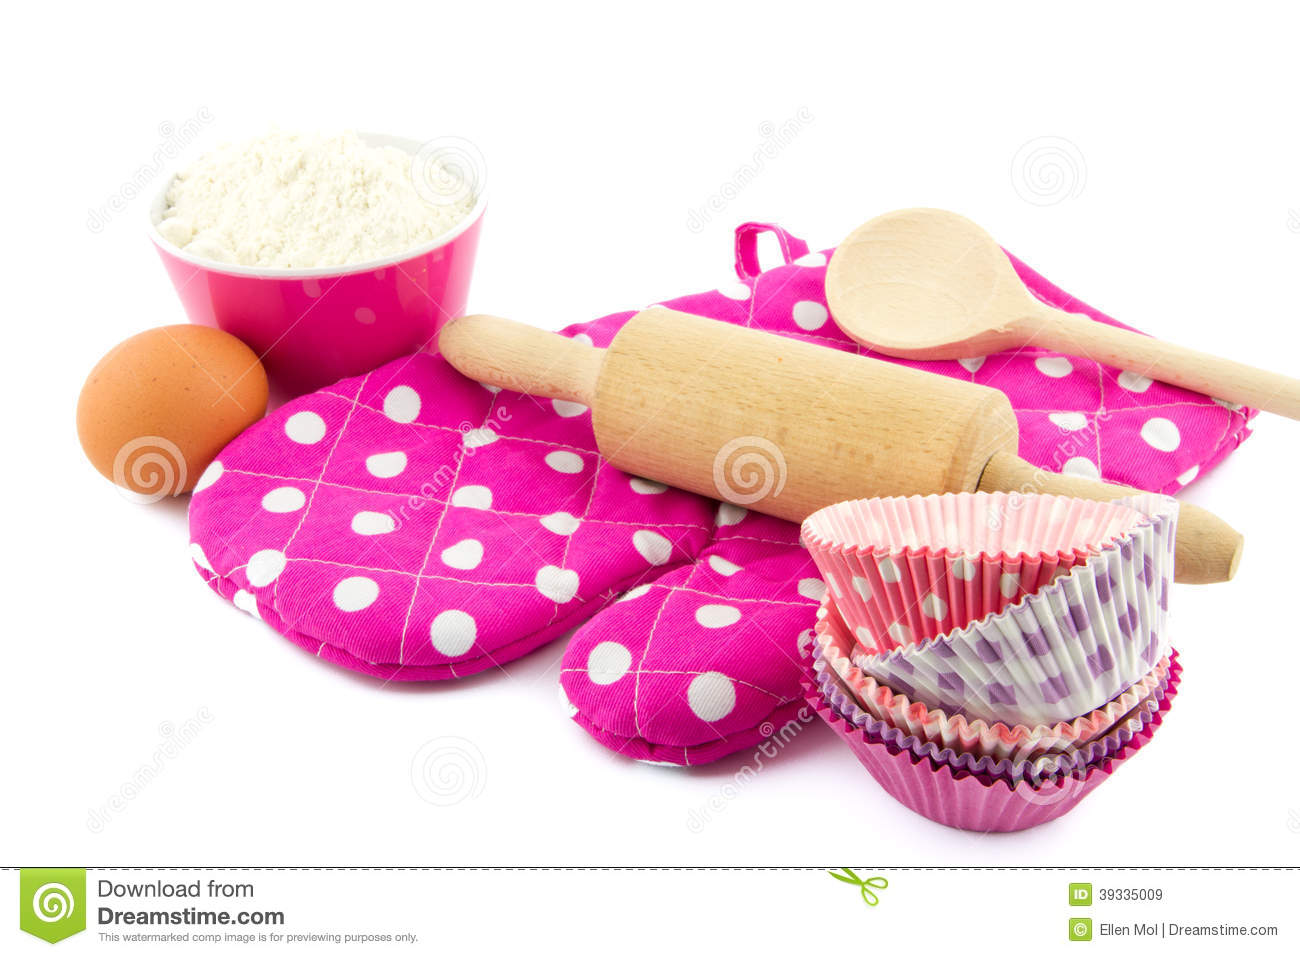 Spotted Pink Oven Glove With Rolling Pin Cup Cake Molds Wooden Spoon